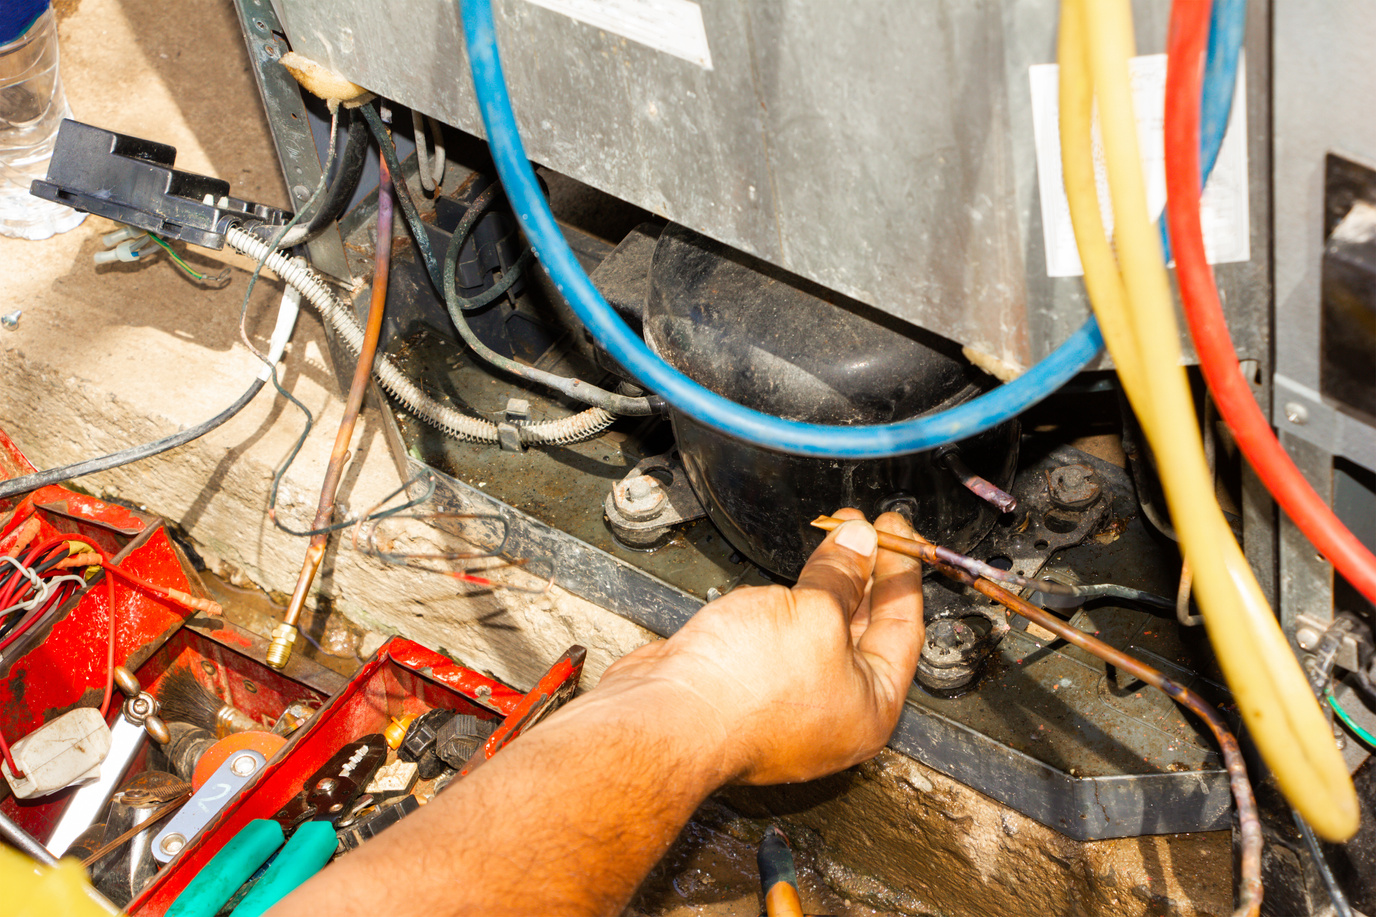 technician repair refrigerator by welding copper pipe and vacuum